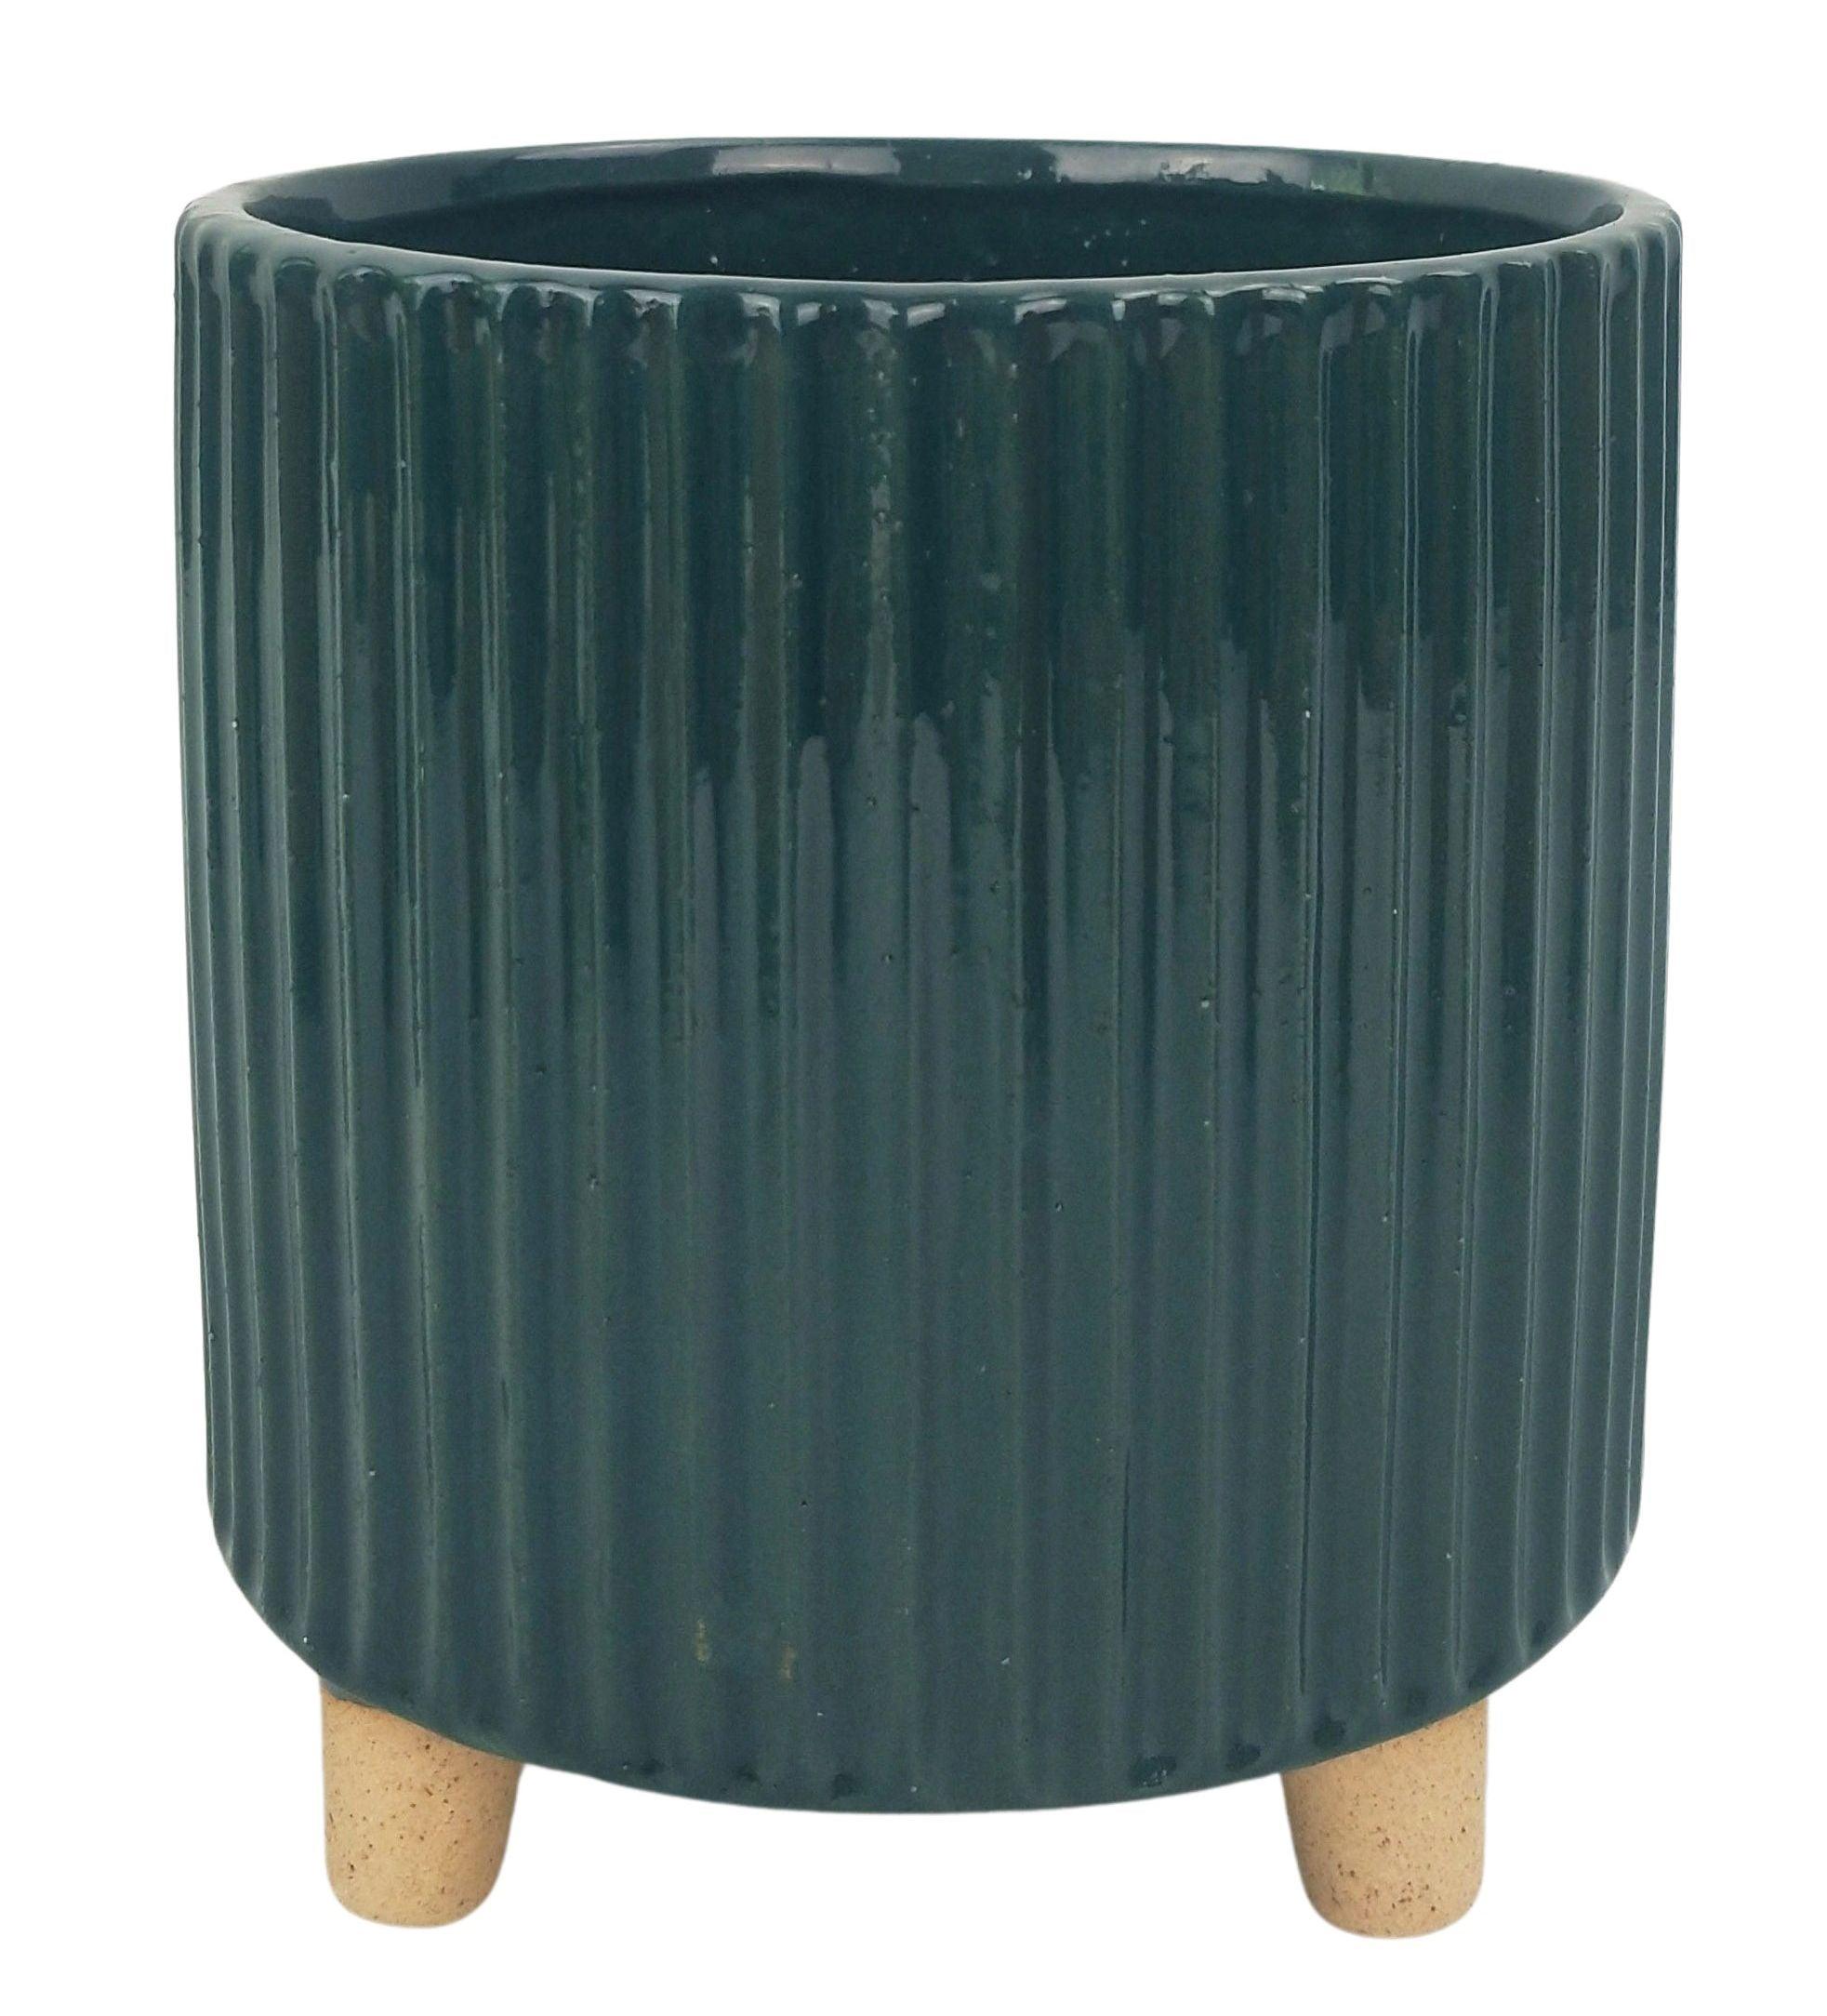 Ribbed Teal Planter with Legs - Plant Homewares & Lifestyle